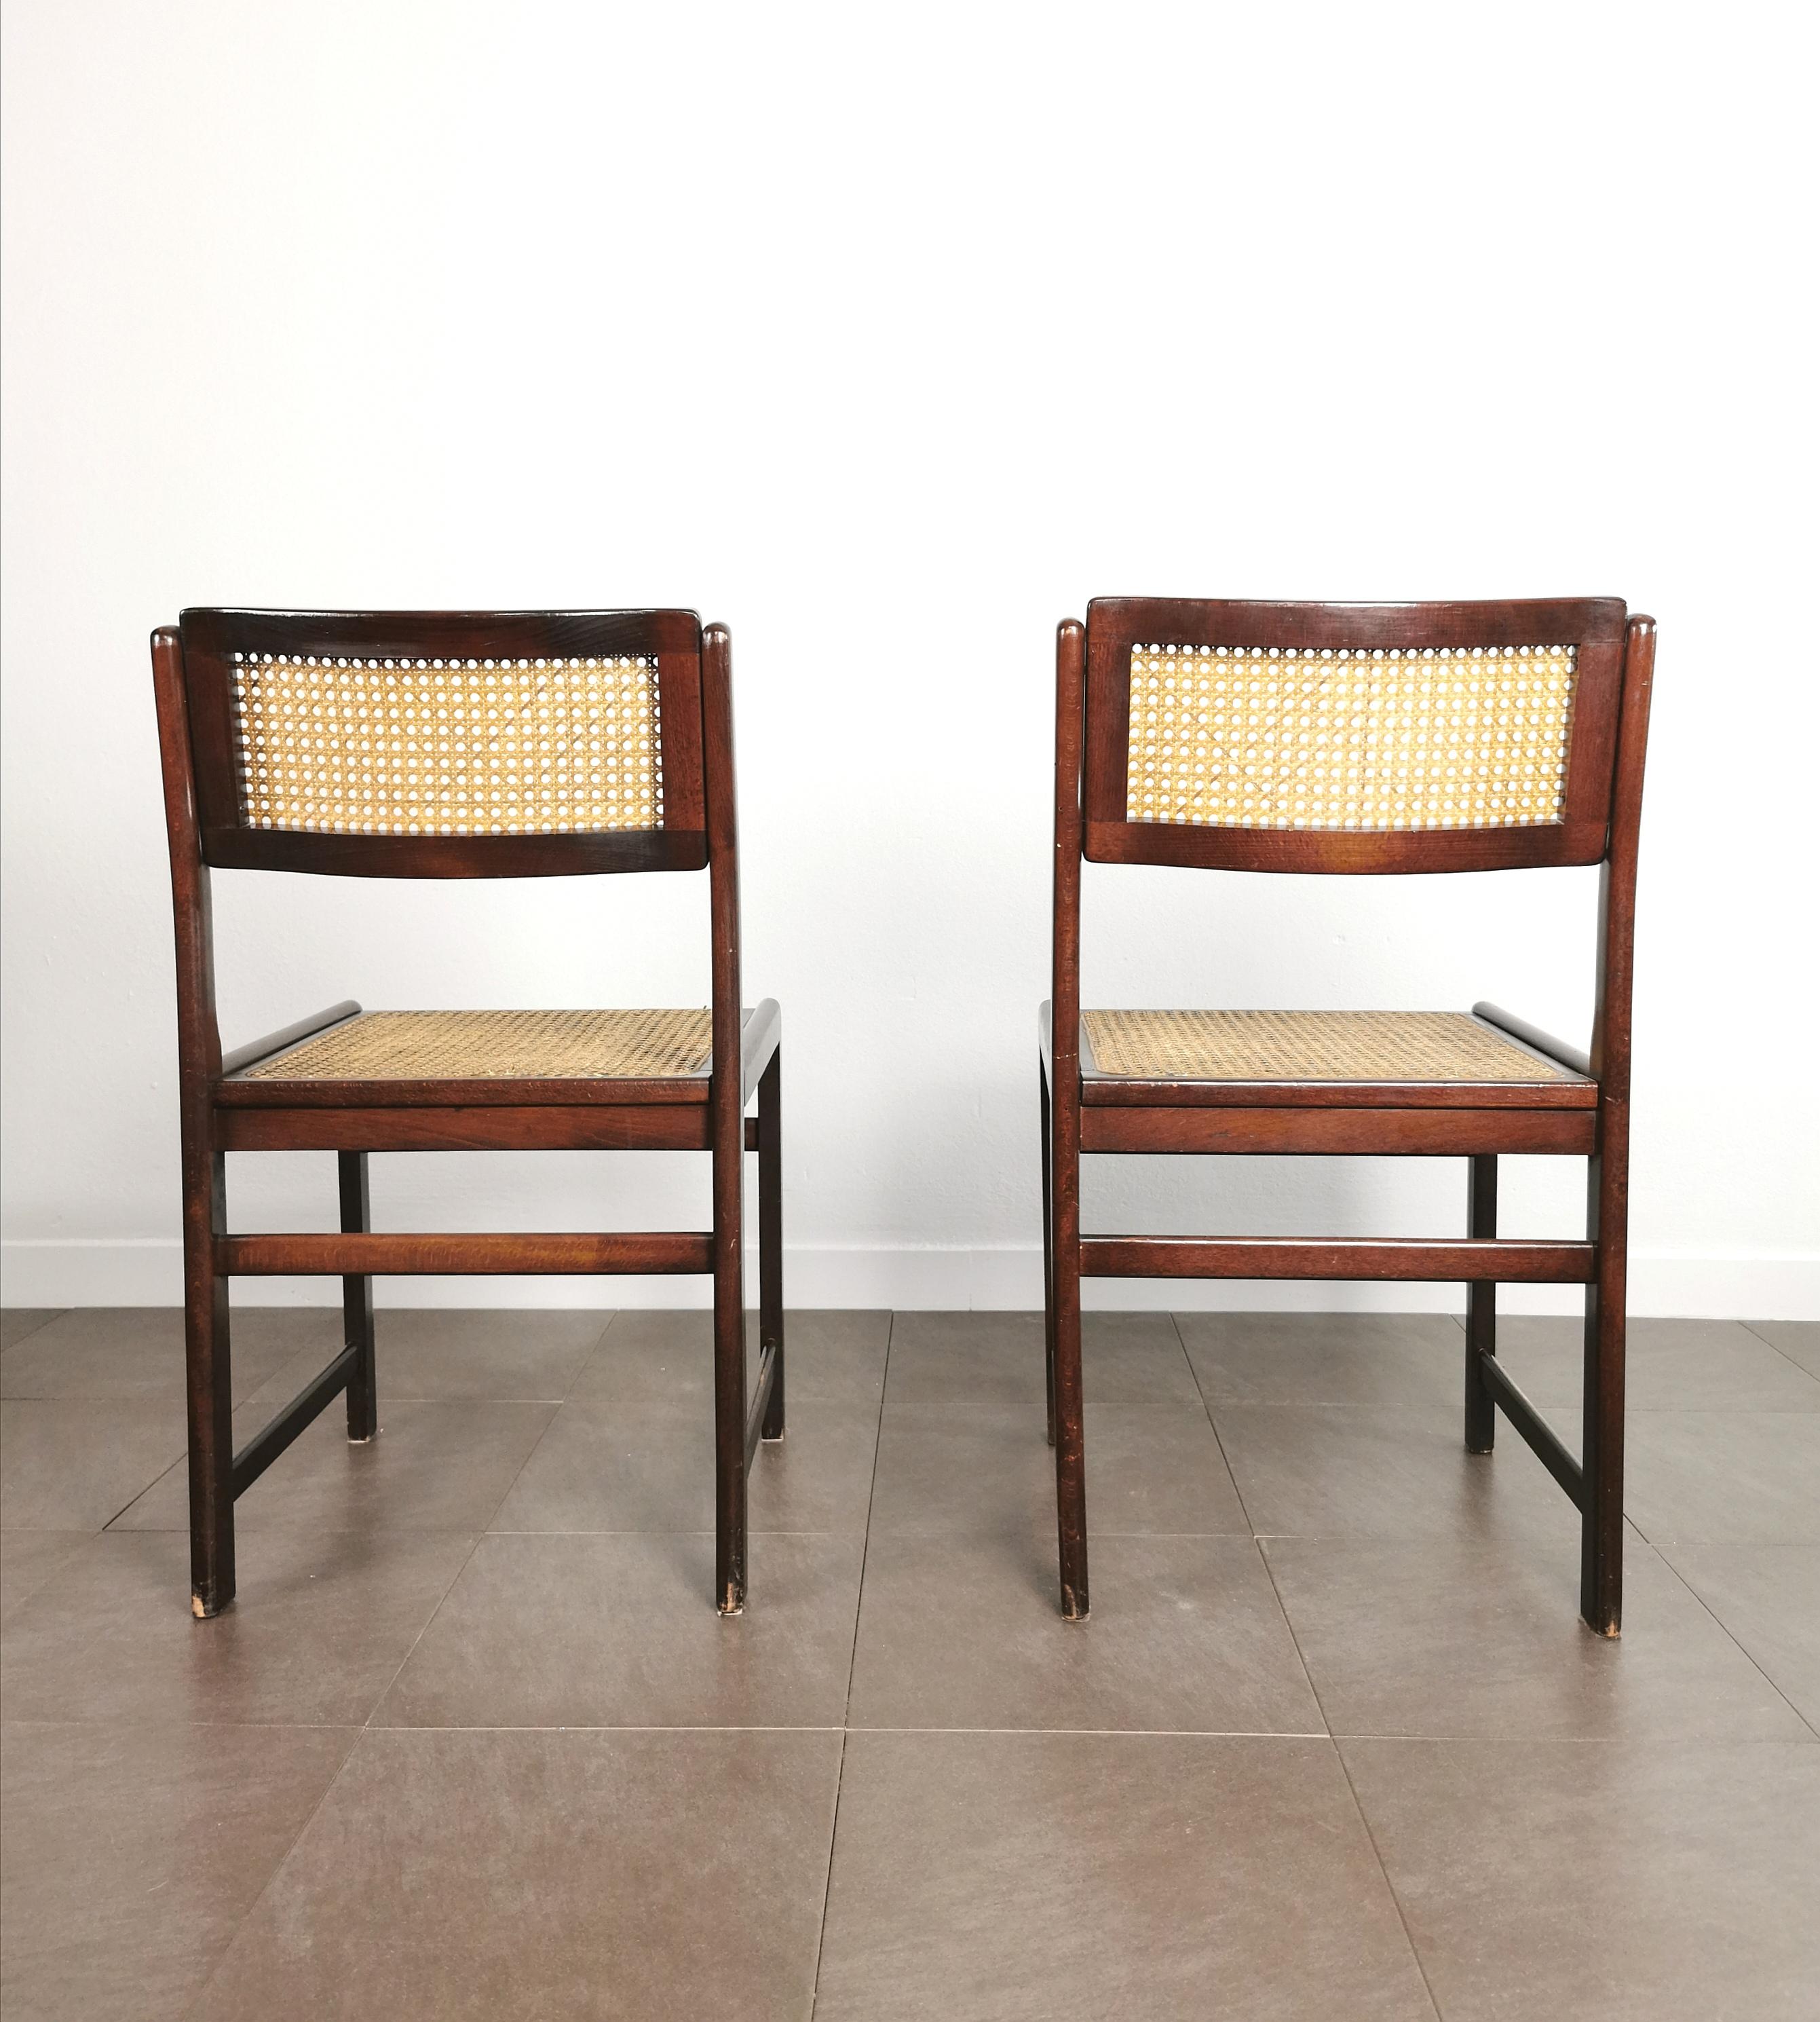 Seating Dining Chairs Wood Vienna Straw Midcentury Italian Design 1960s Set of 2 For Sale 5